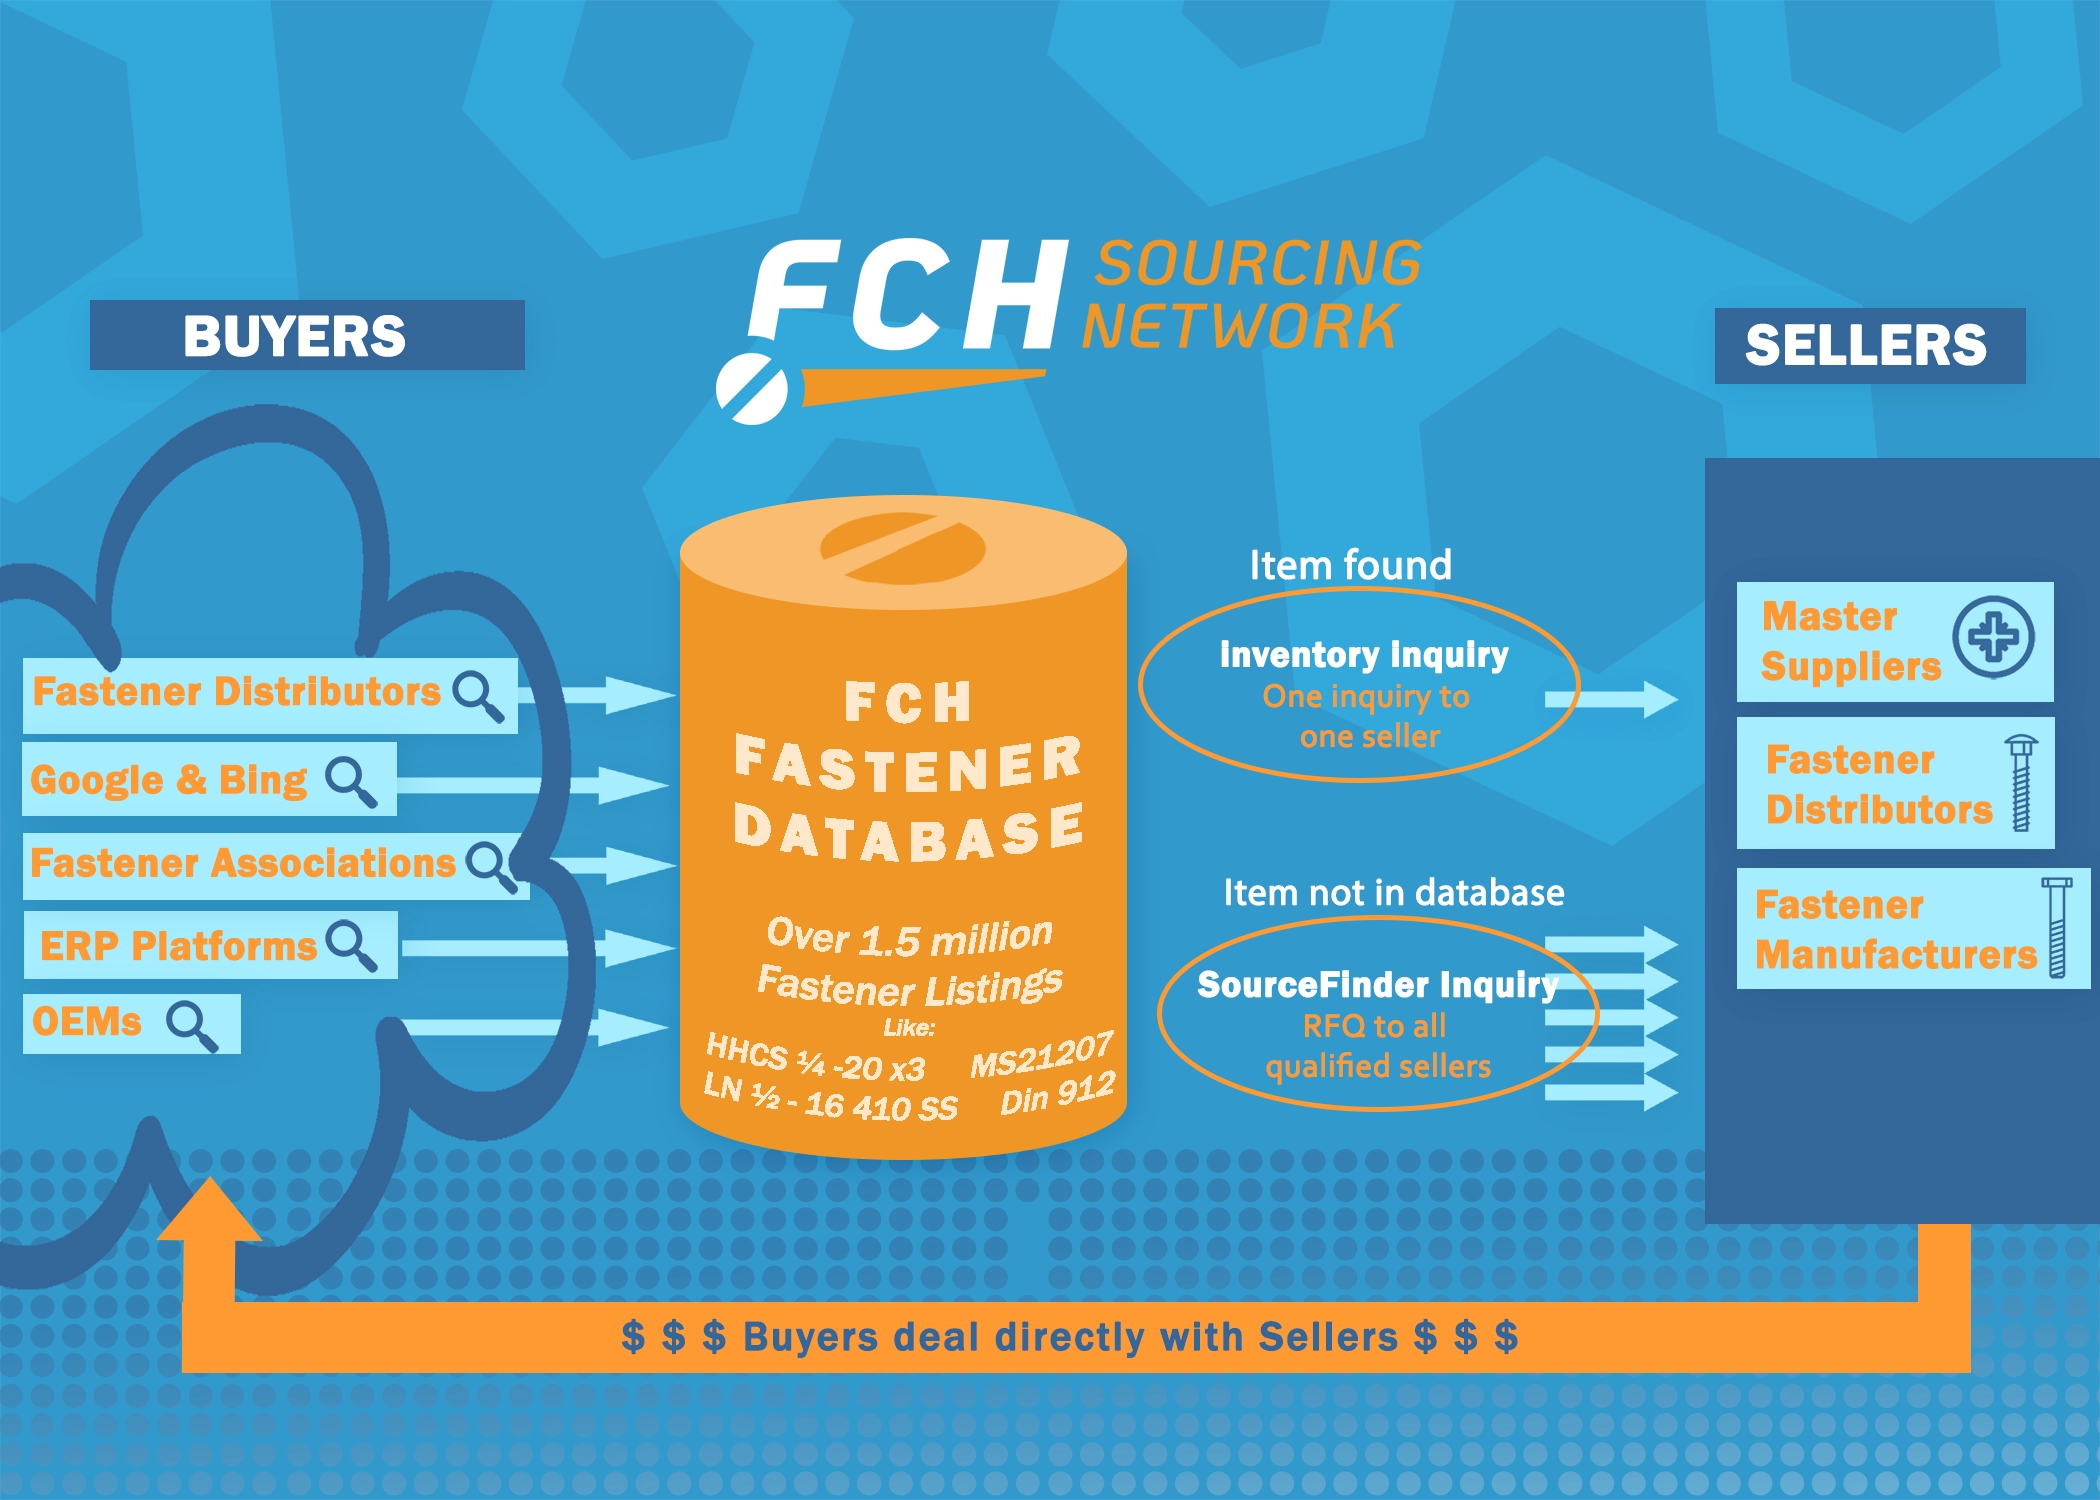 how the FCH Sourcing network works